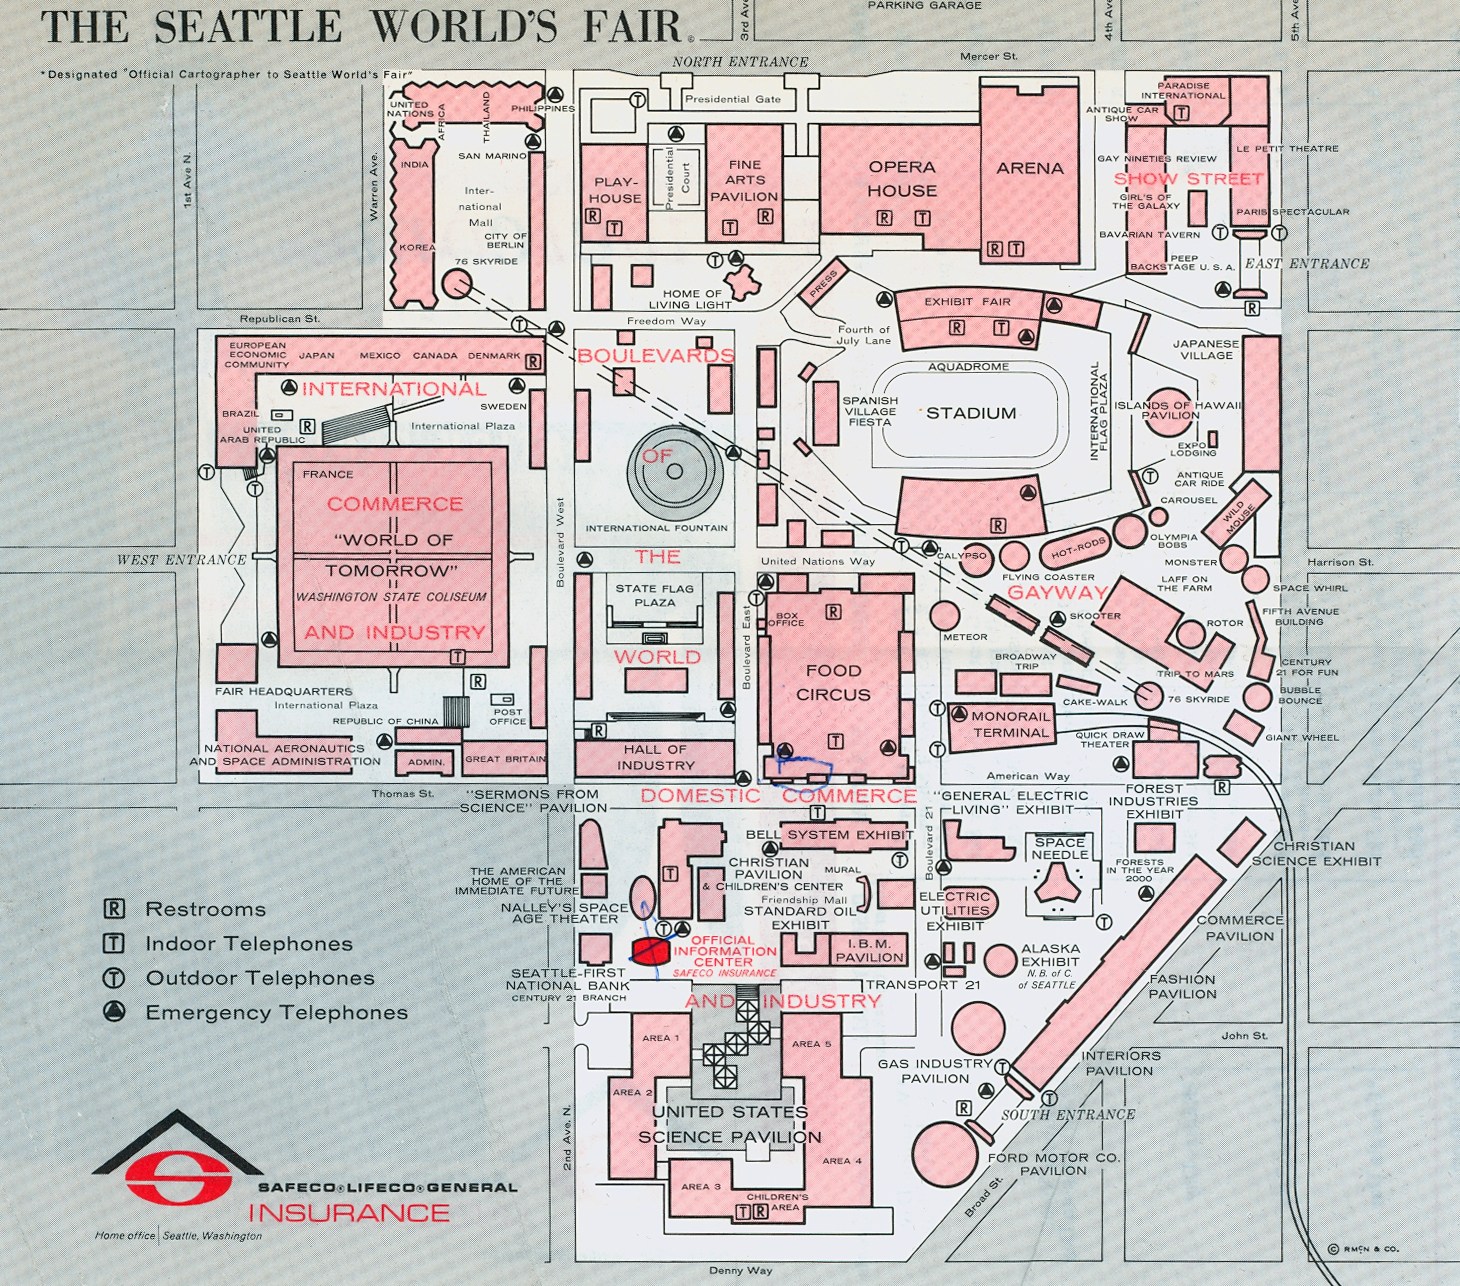 1962 map of Seattle World's Fairgrounds